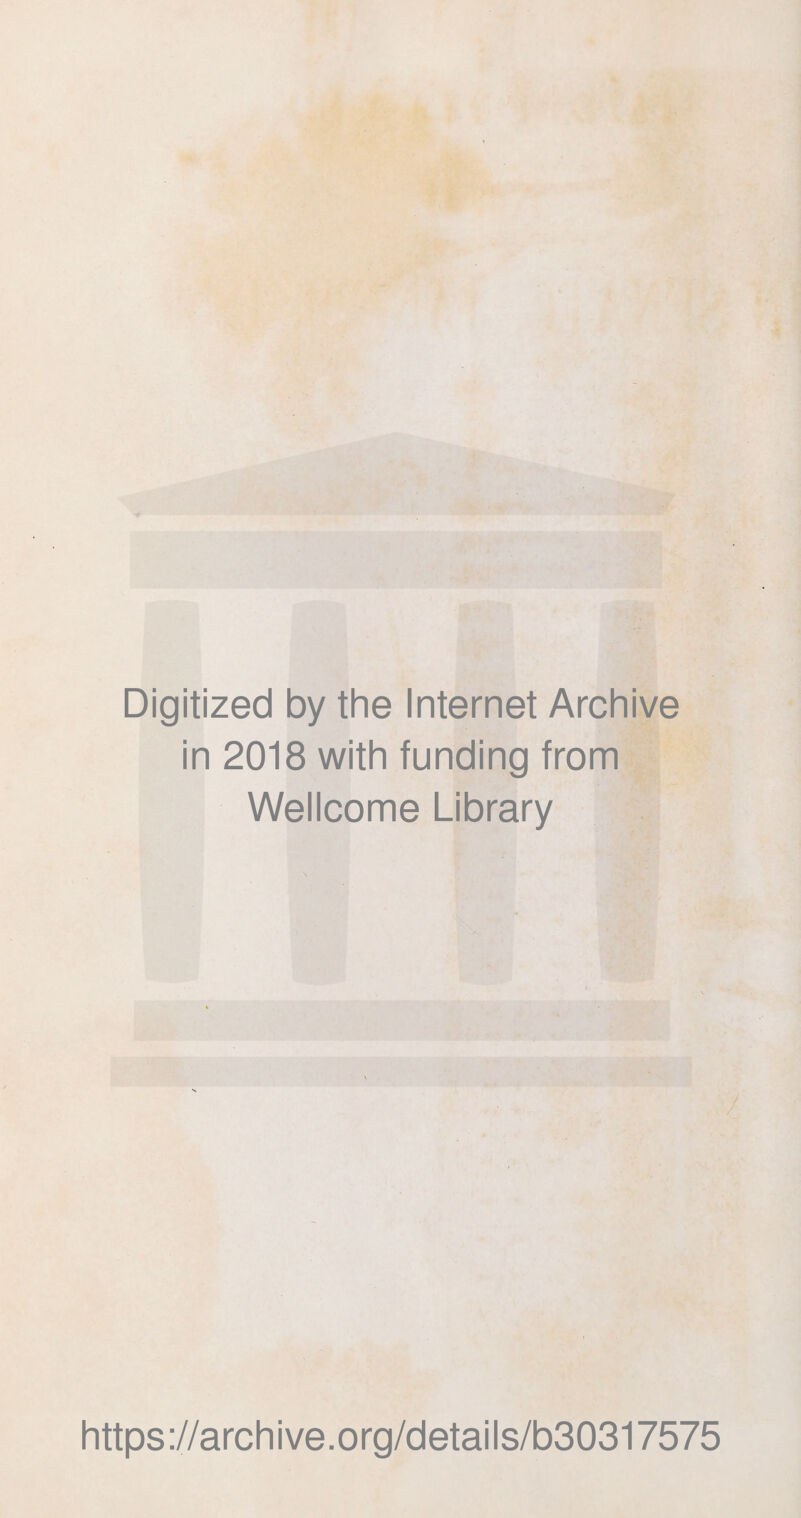 Digitized by the Internet Archive in 2018 with funding from Wellcome Library https://archive.org/details/b30317575